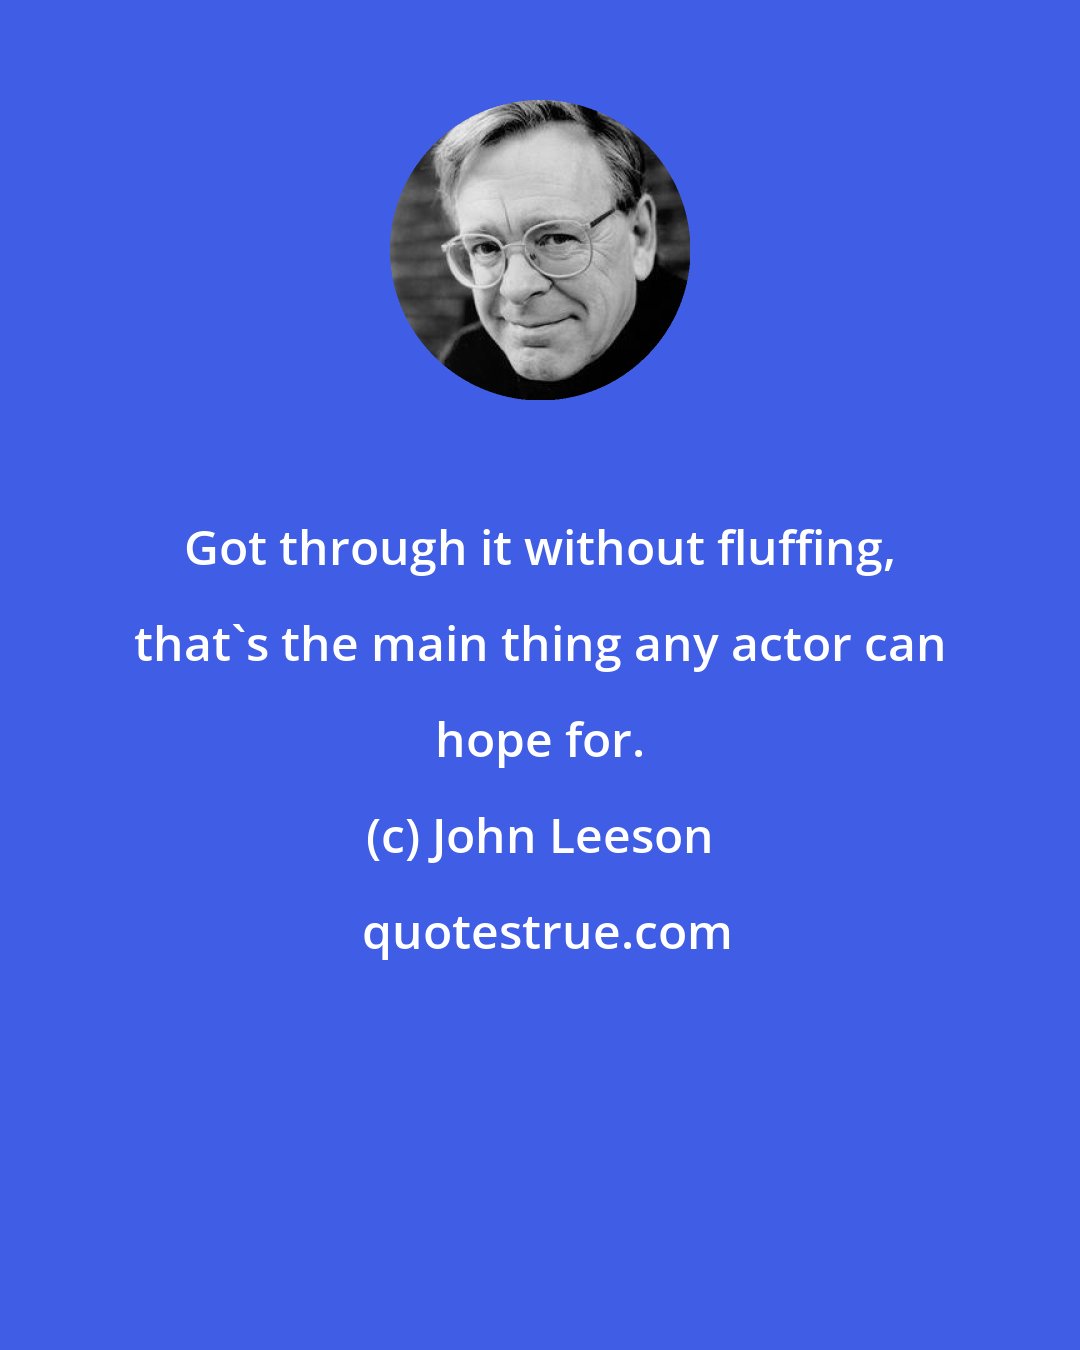 John Leeson: Got through it without fluffing, that's the main thing any actor can hope for.